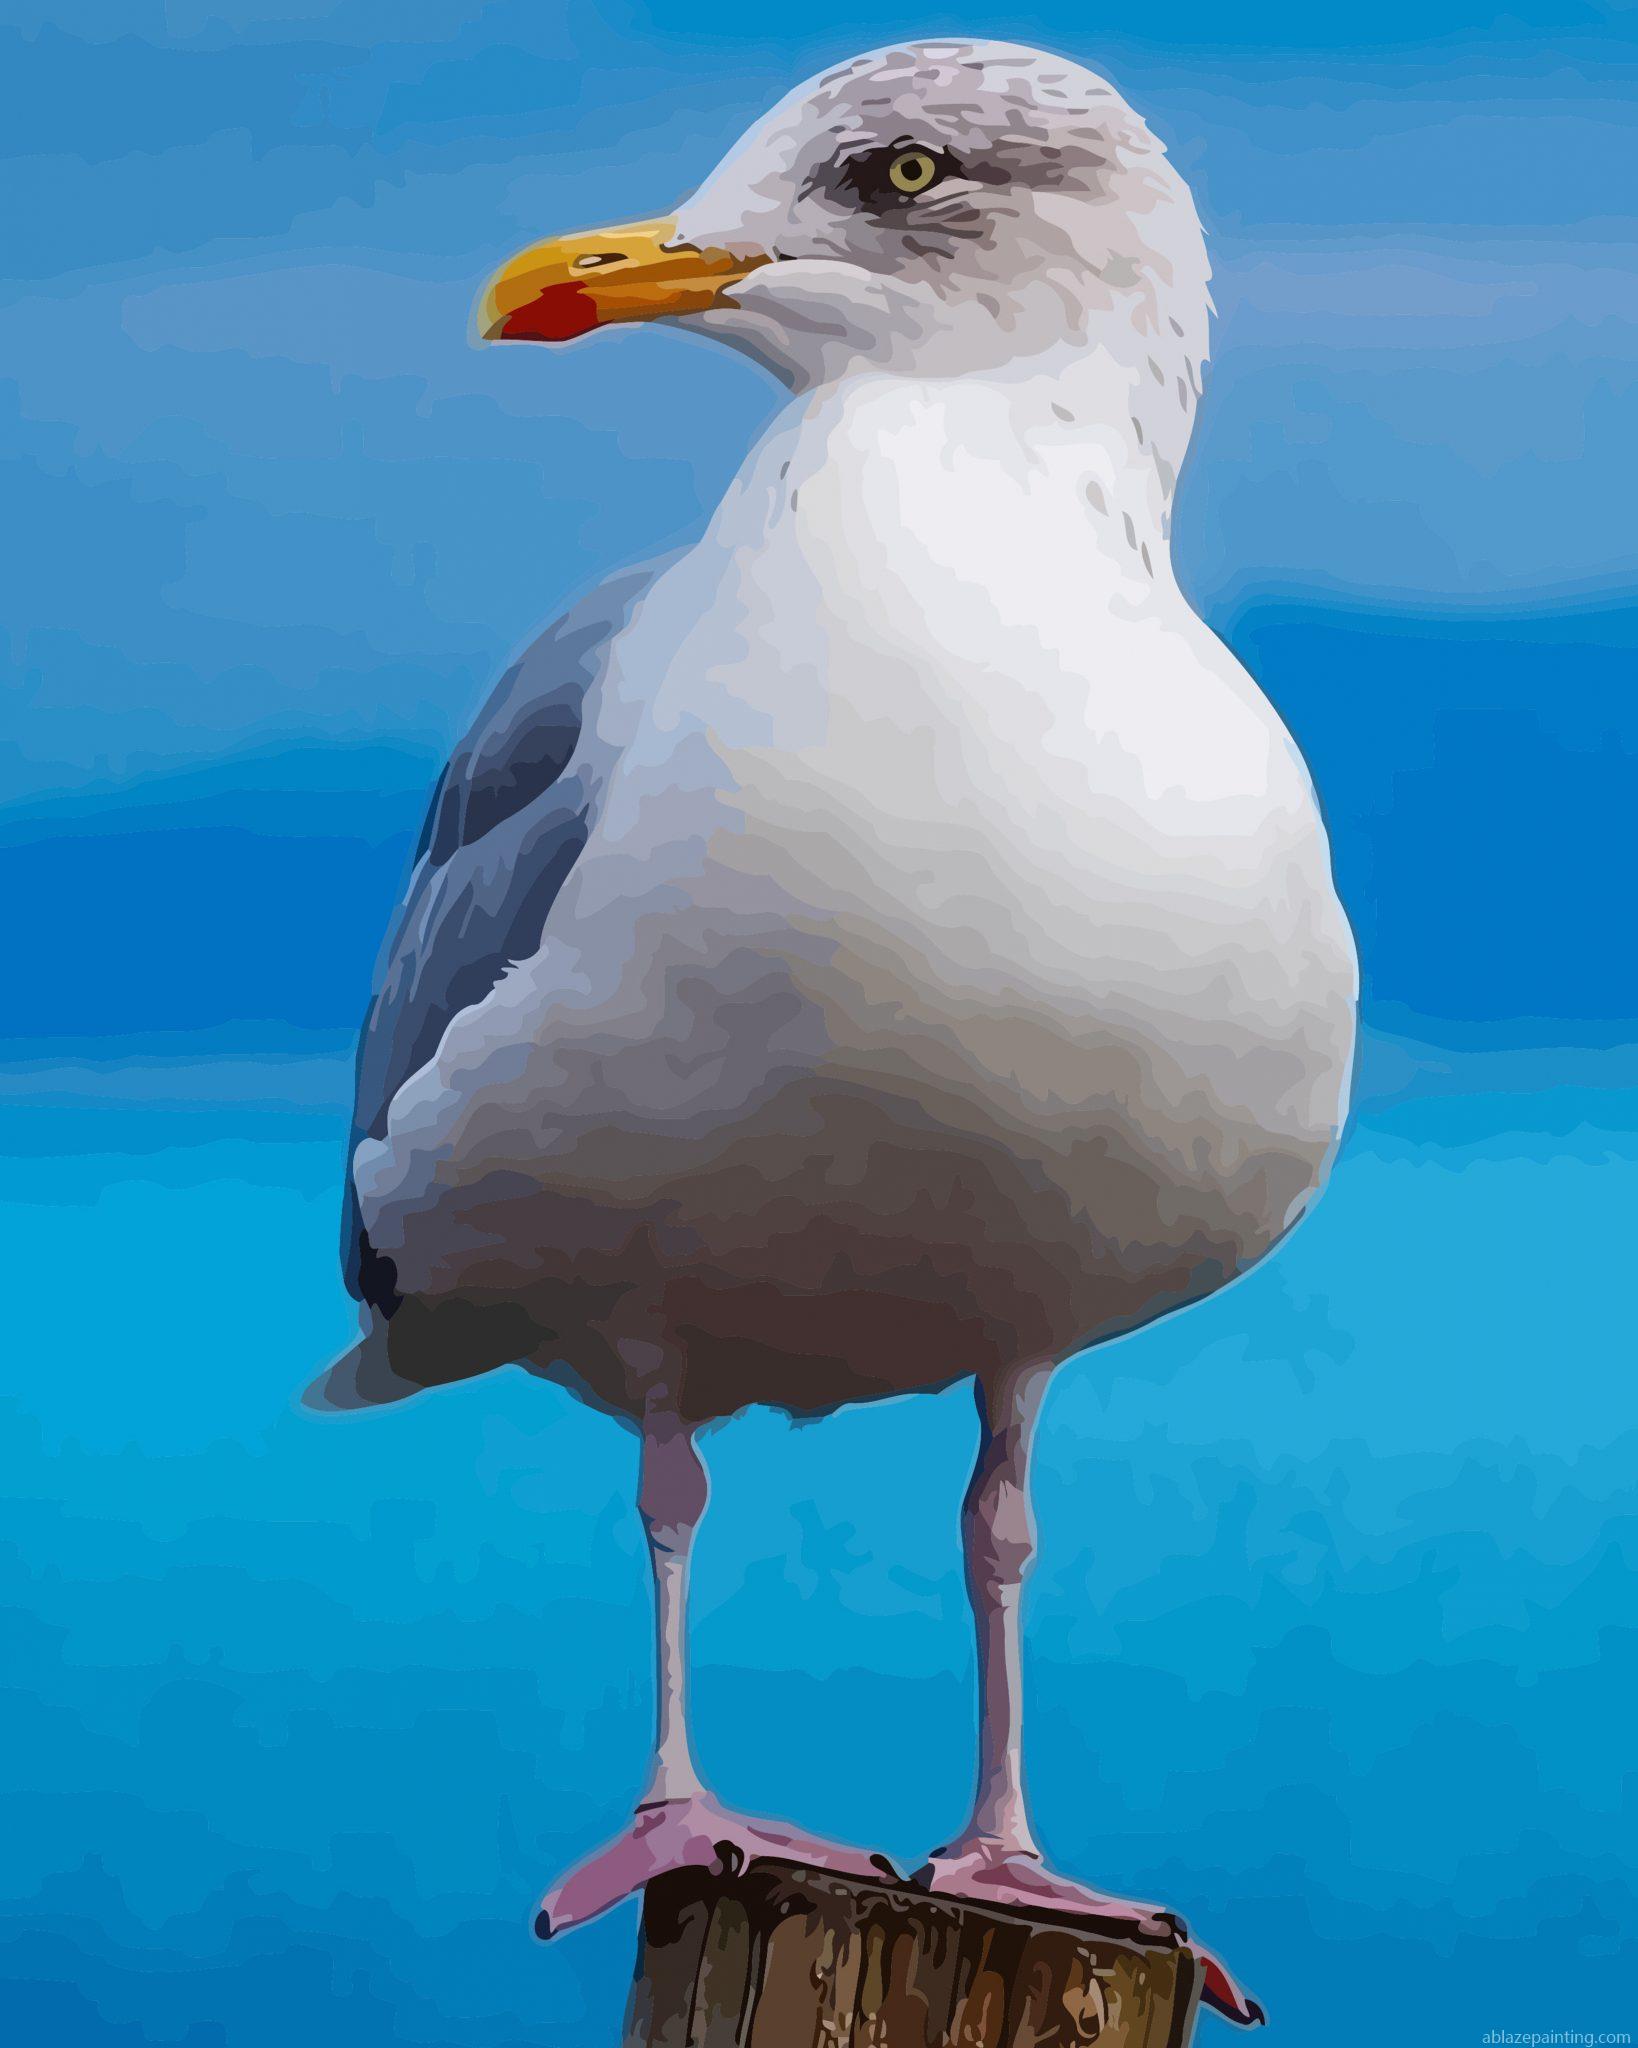 Aestehtic Seagull Bird Paint By Numbers.jpg